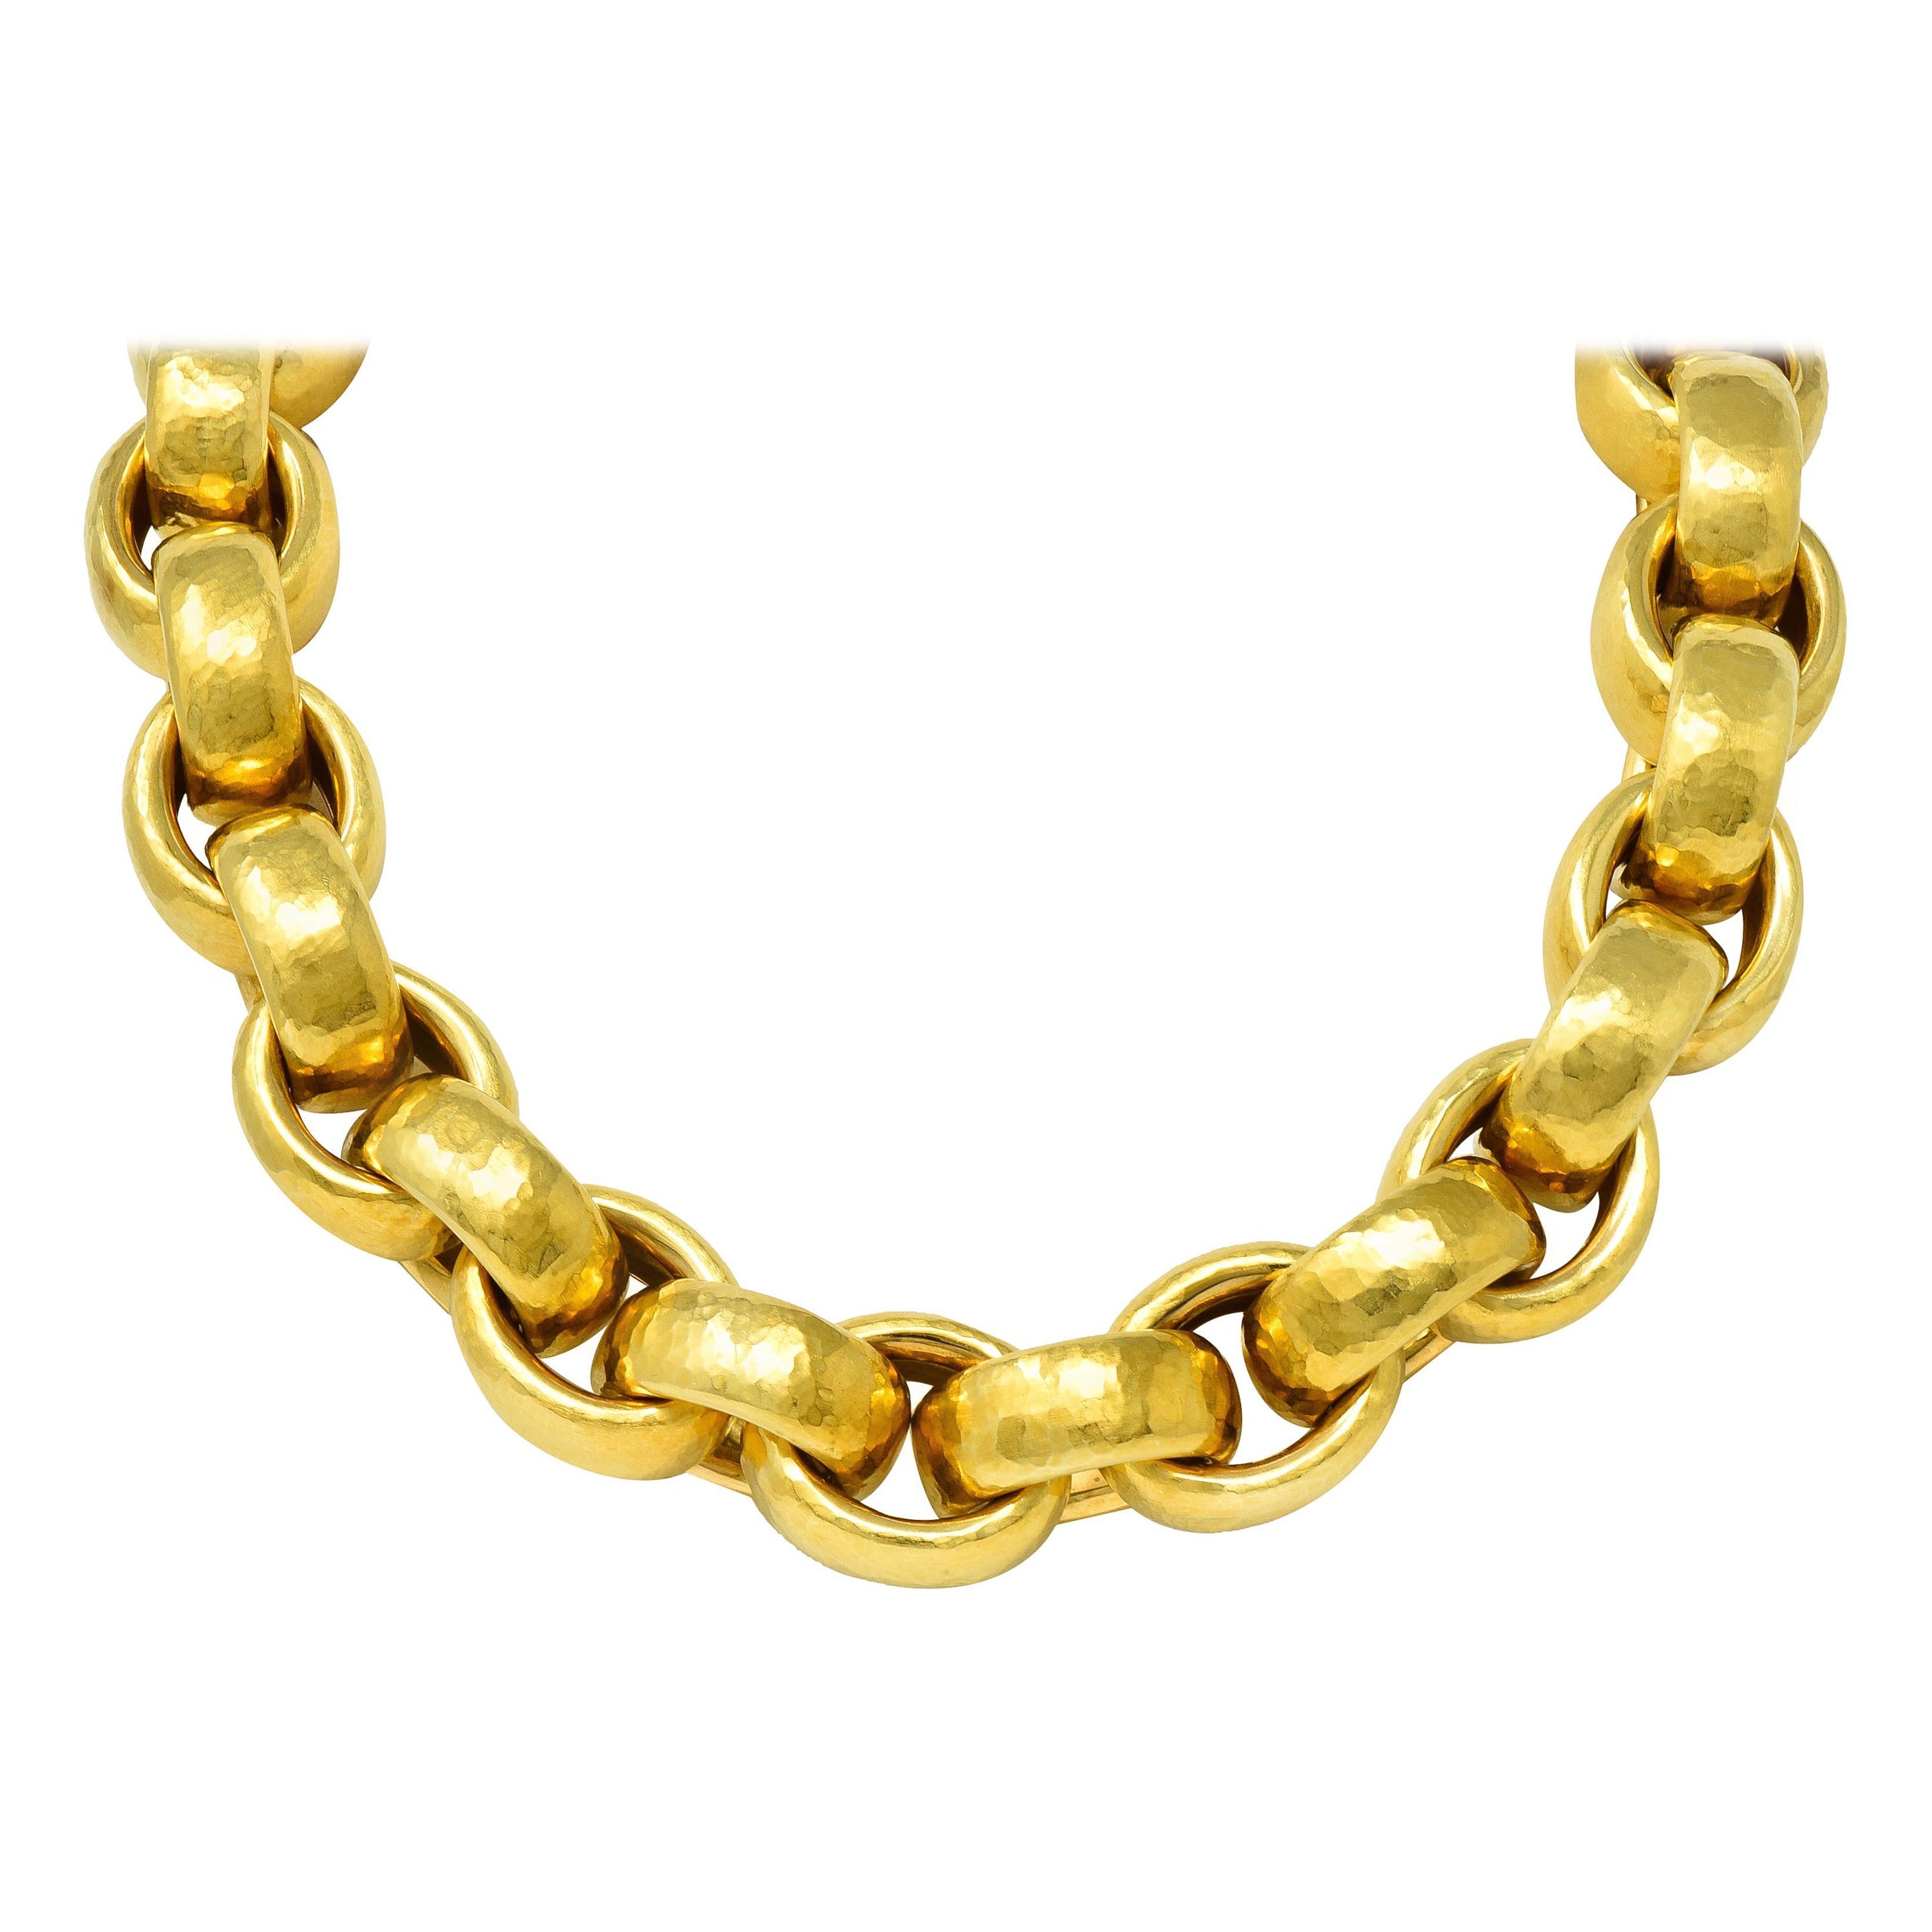 1989 Paloma Picasso Tiffany & Co. 18 Karat Yellow Gold Hammered Link Necklace For Sale